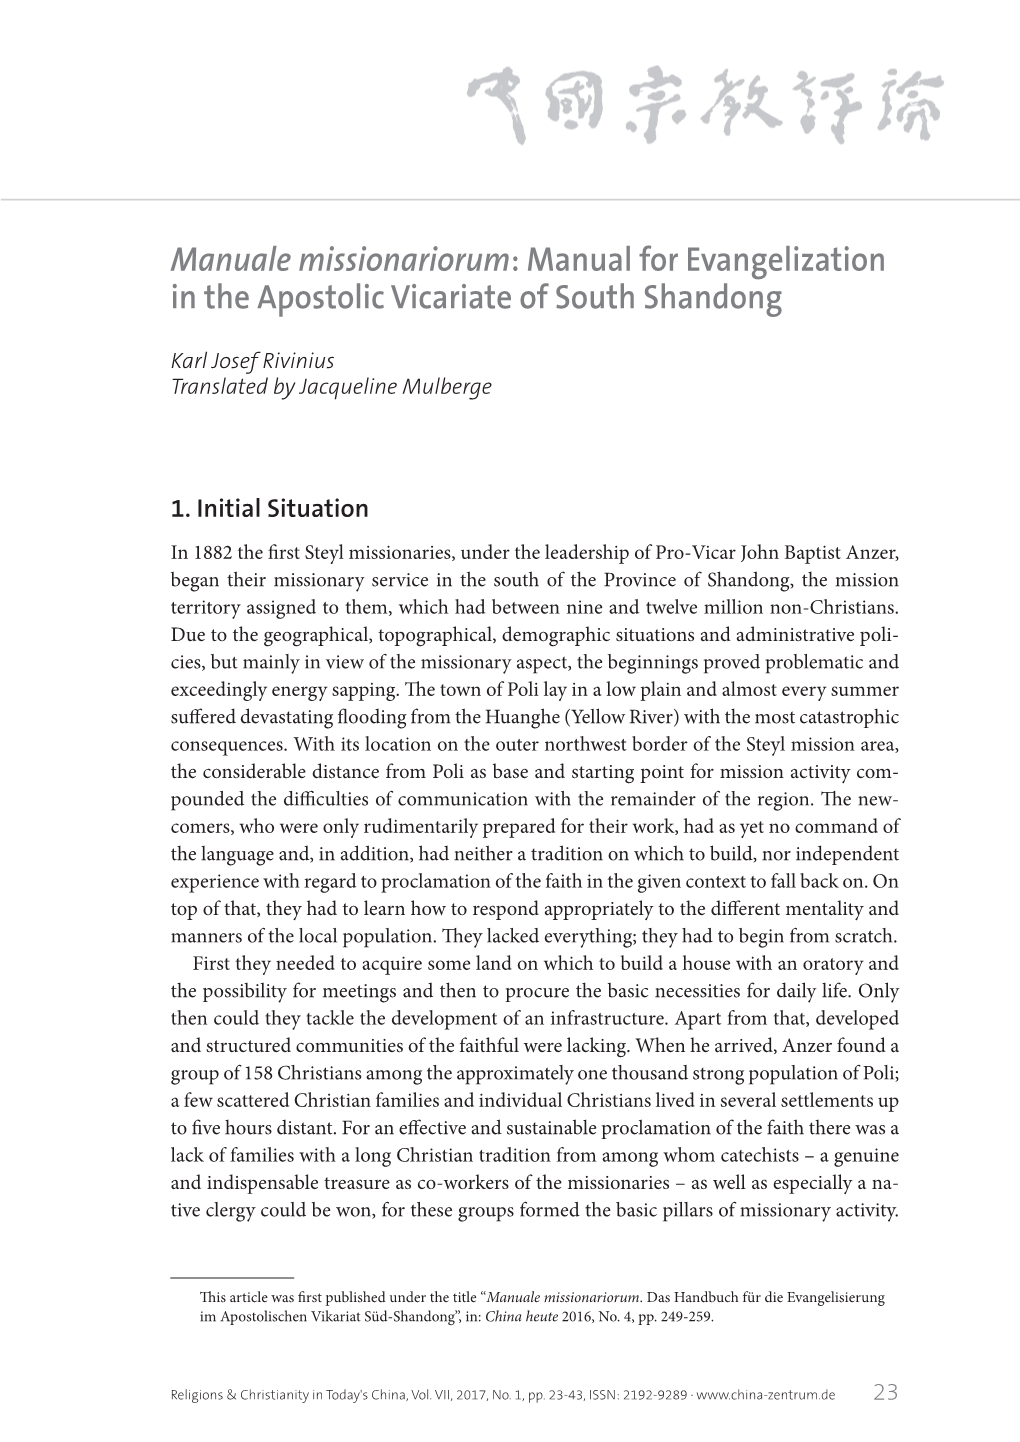 Manuale Missionariorum: Manual for Evangelization in the Apostolic Vicariate of South Shandong